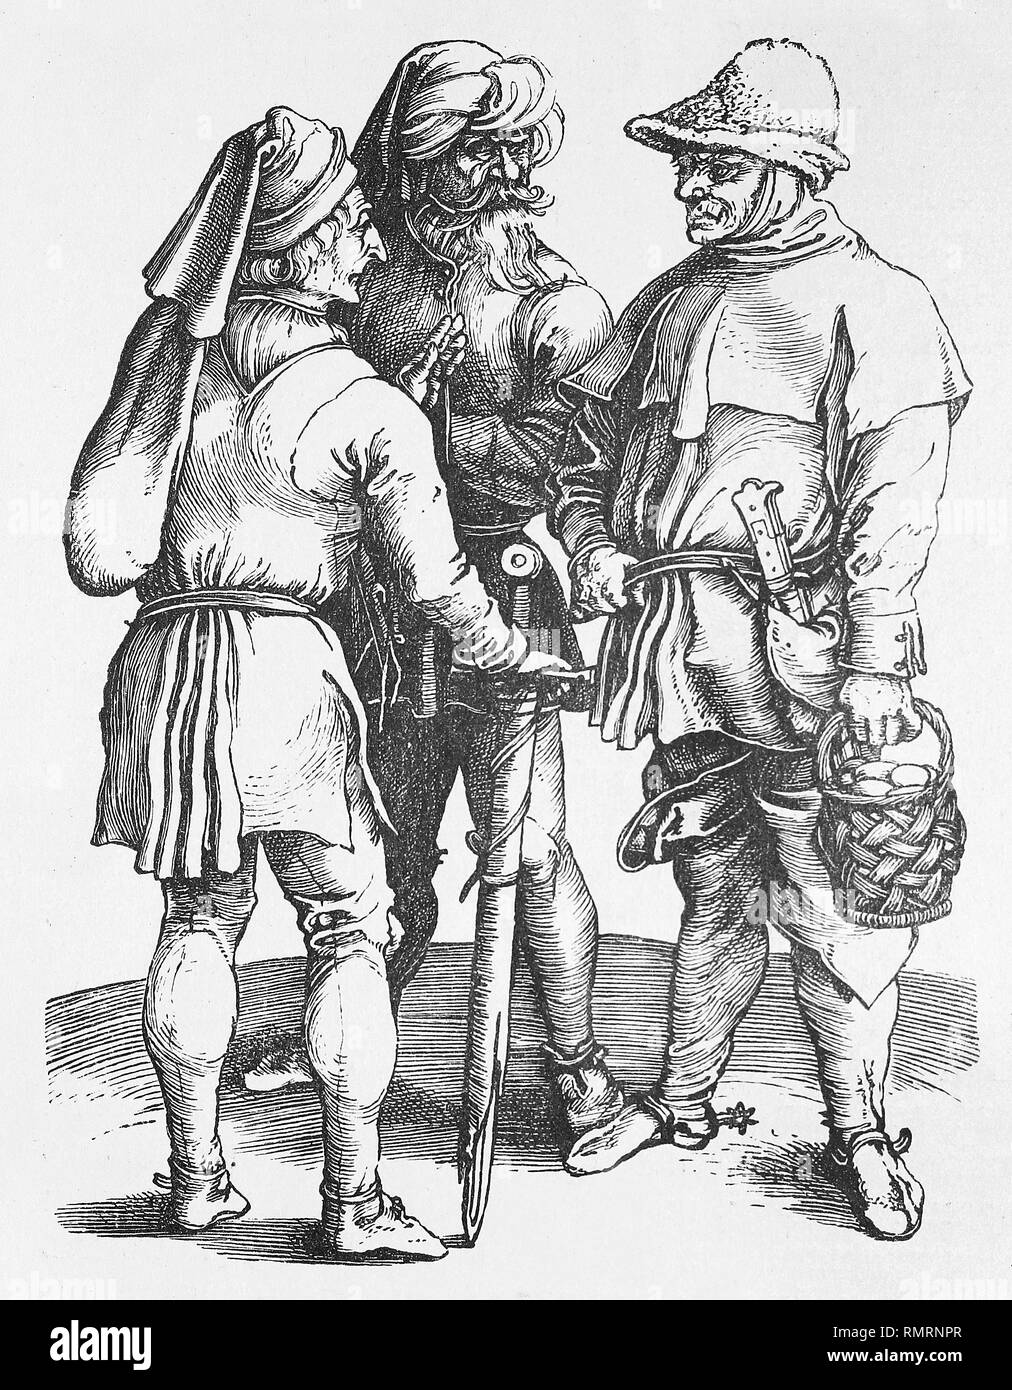 Three peasants in early 16th century. Stock Photo